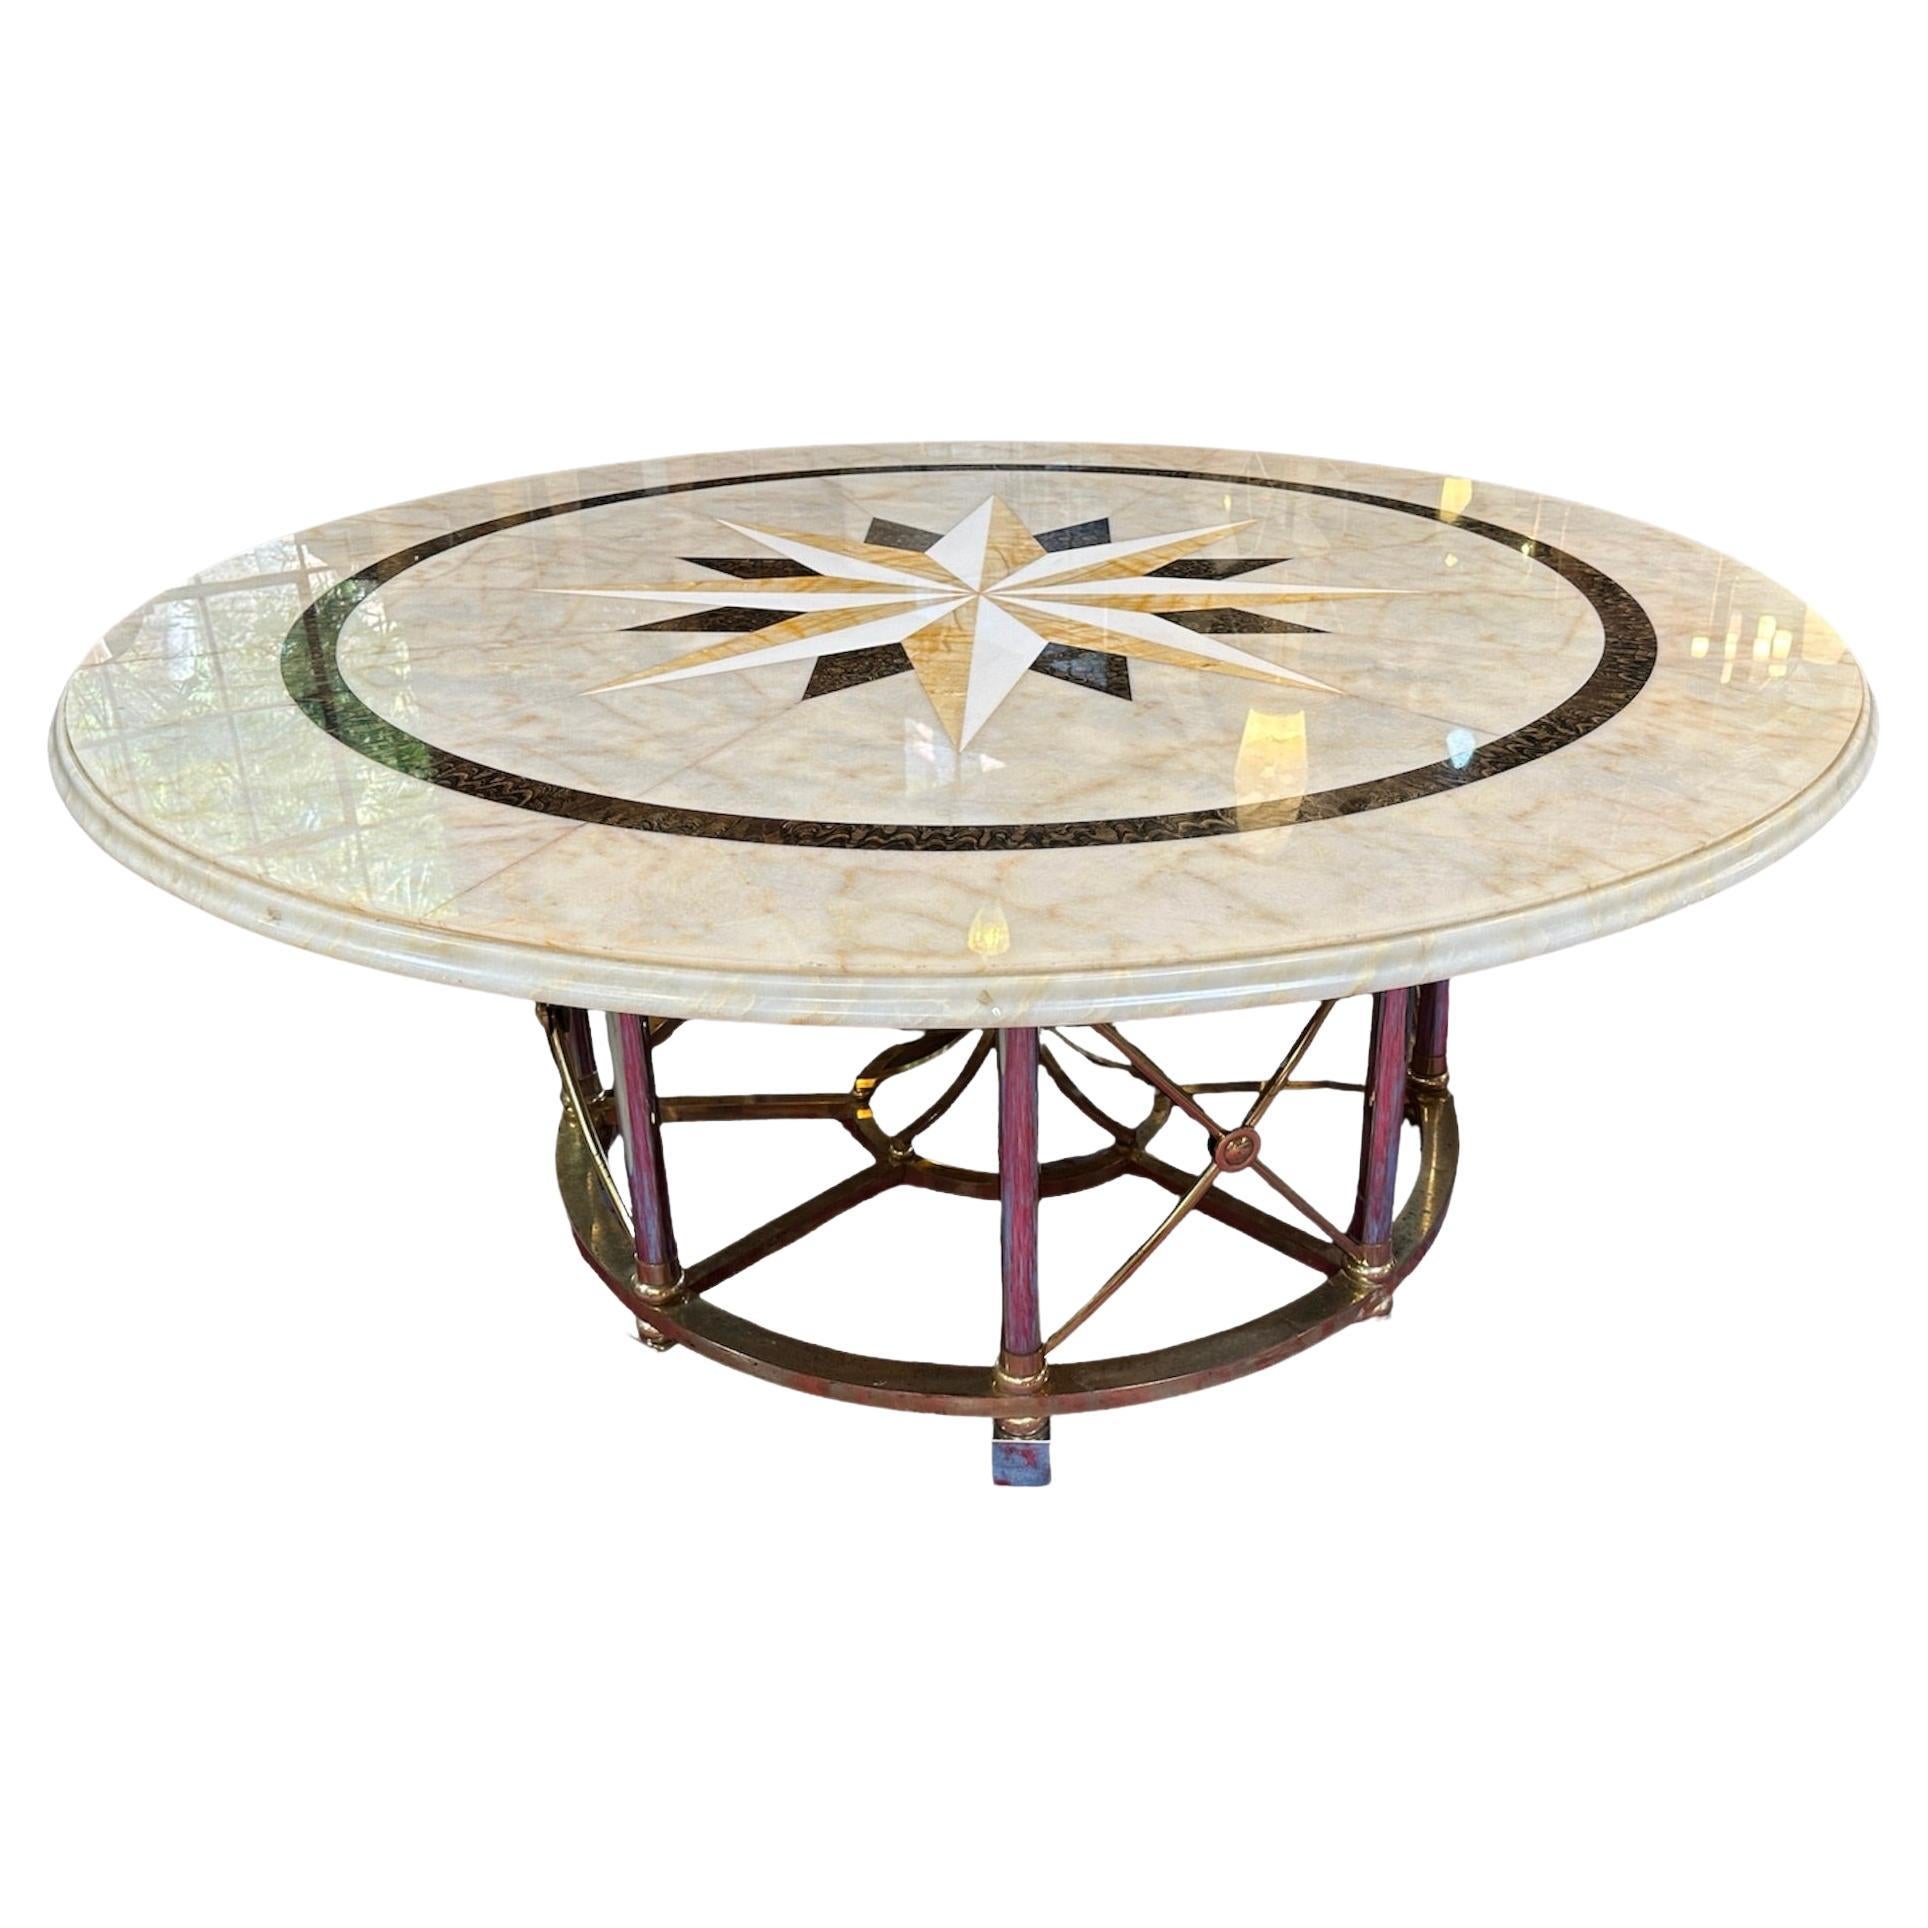 Oversize Midcentury Round Marble Dining Table, 1960s For Sale